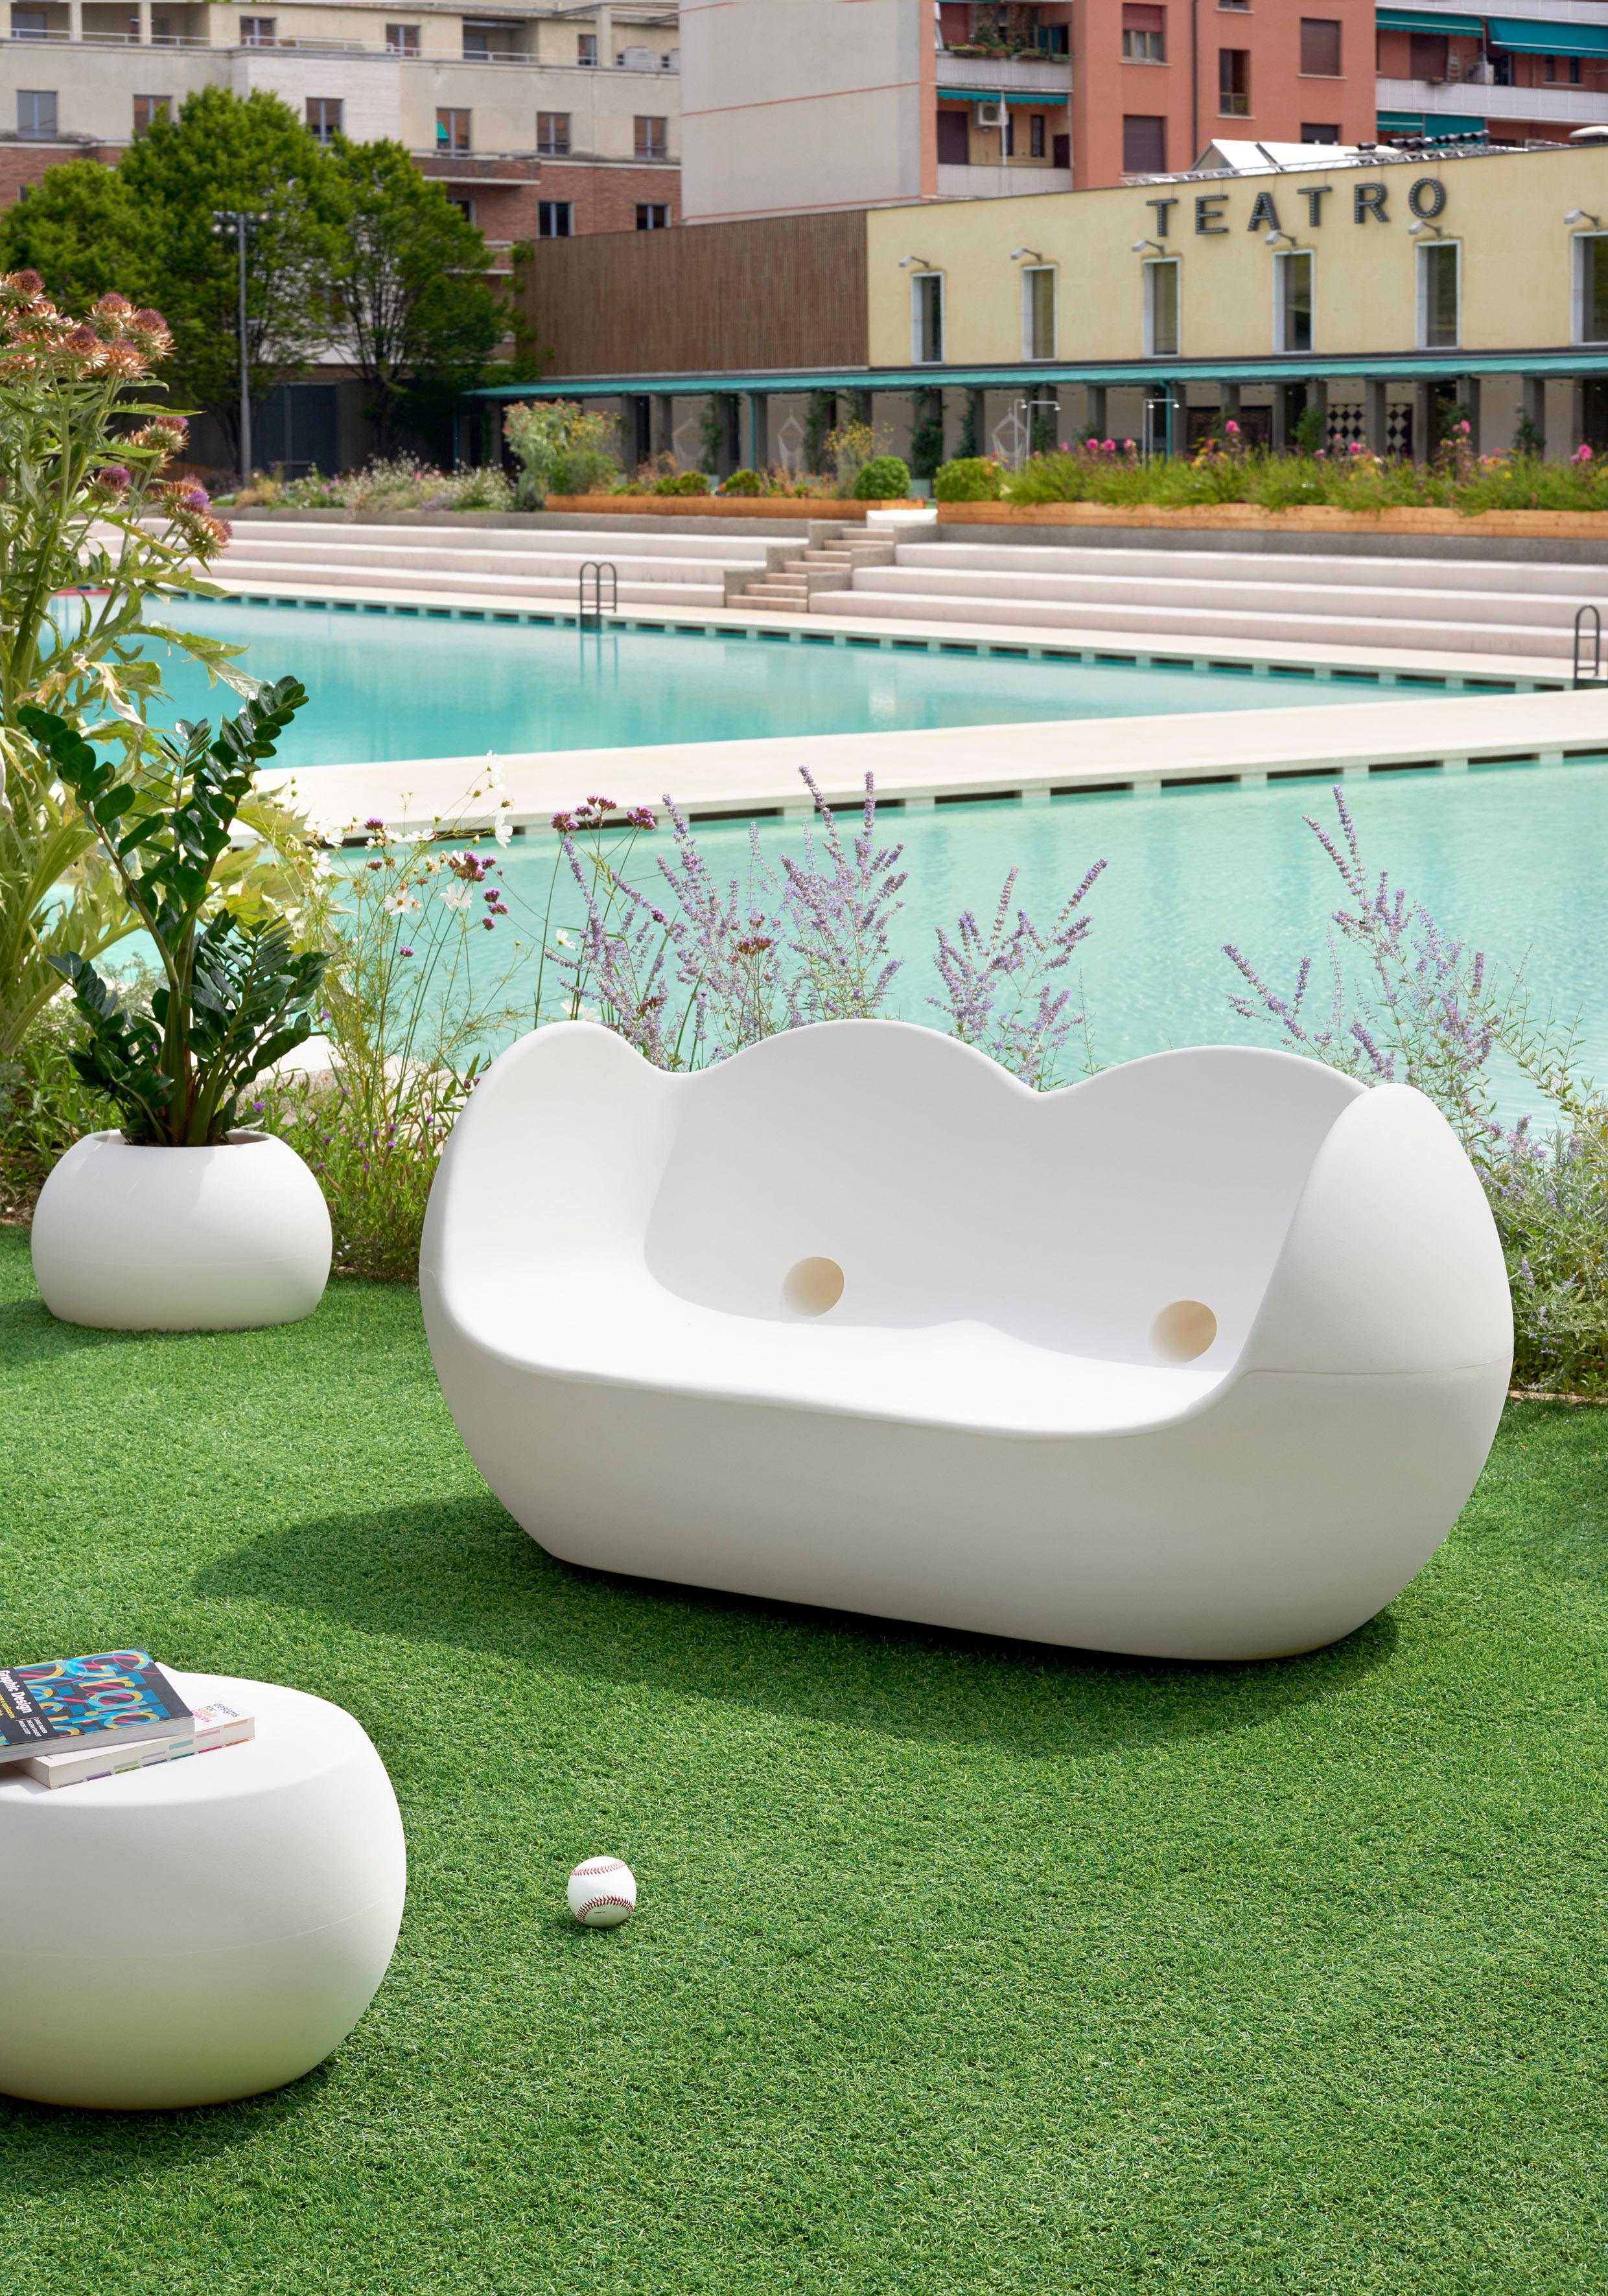 Pumpkin Orange Blossy Rocking Sofa by Karim Rashid
Dimensions: D 85 x W 159 x H 75 cm. Seat Height: 34 cm.
Materials: Polyethylene.
Weight: 38 kg.

Available in different color options. This product is suitable for indoor and outdoor use. Please